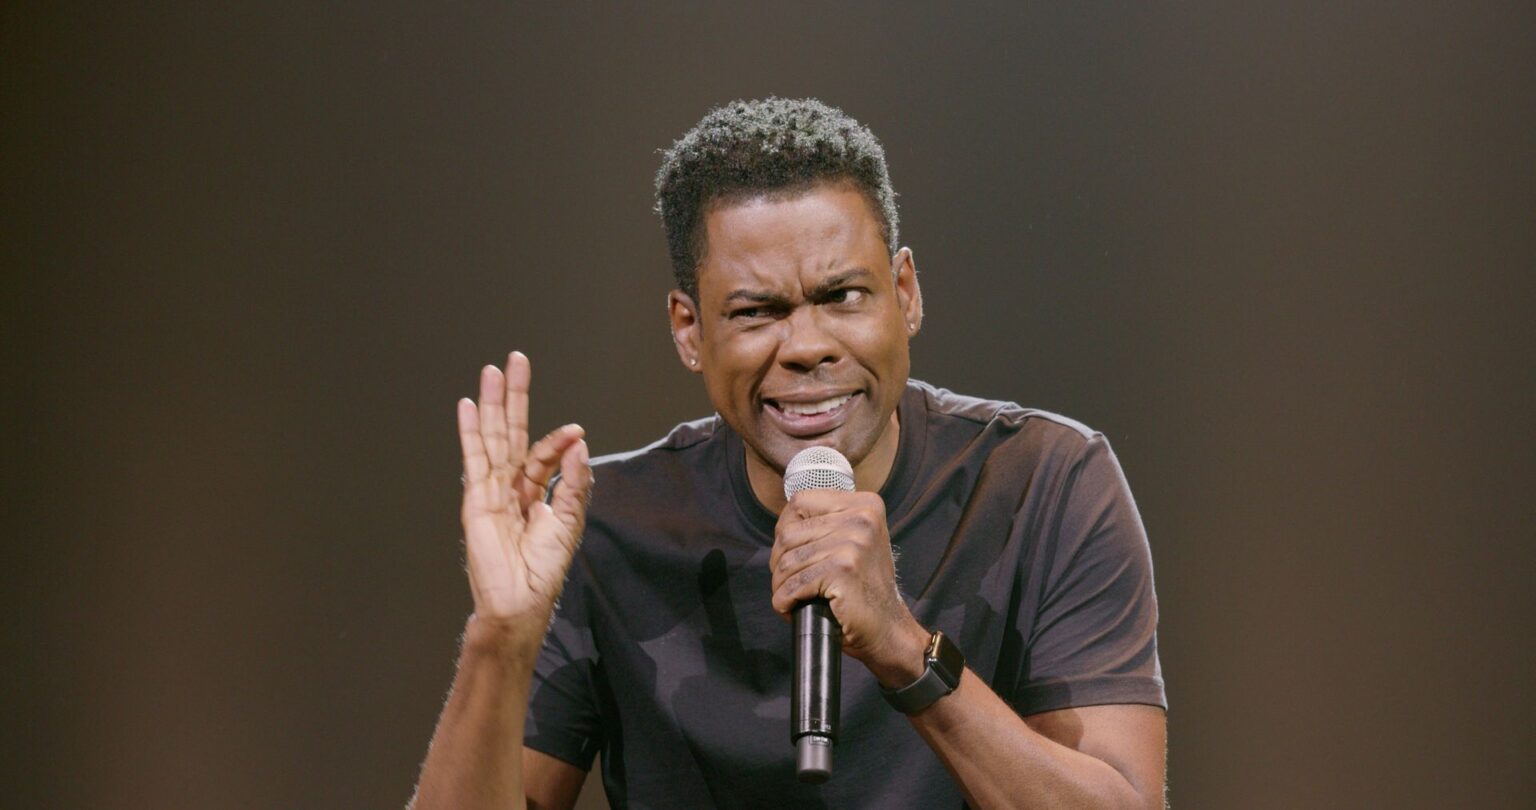 Chris Rock is a comedian, actor, writer, producer, and director. He started doing stand-up comedy shows way back in 1984, so what's his net worth now?